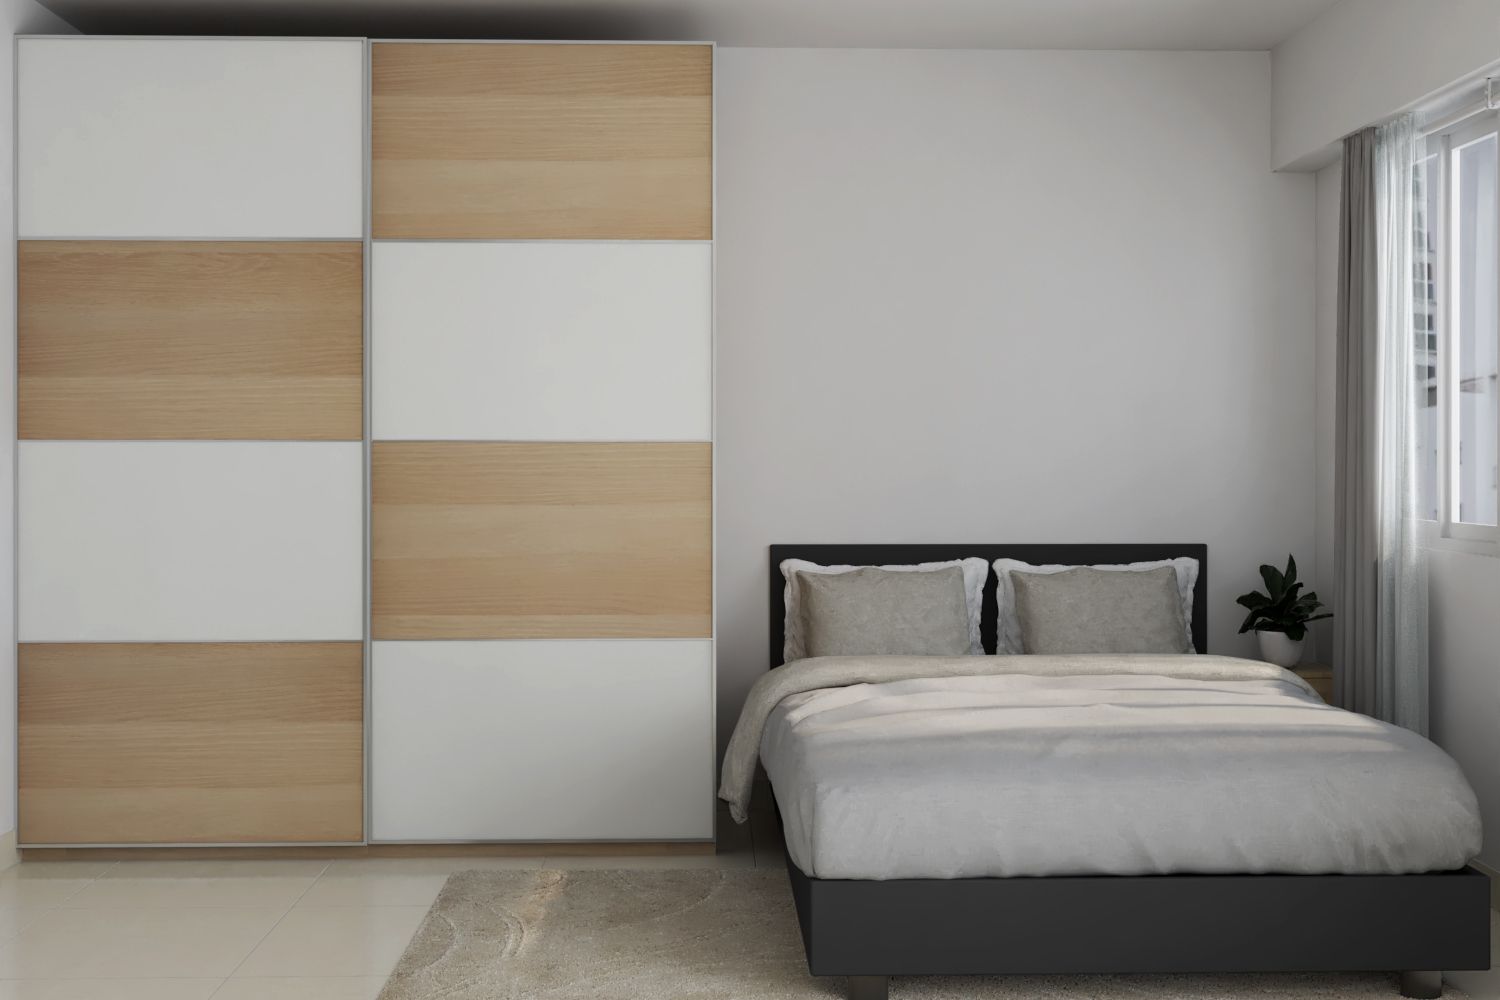 Contemporary Master Bedroom Design With White And Wood Sliding Wardrobe